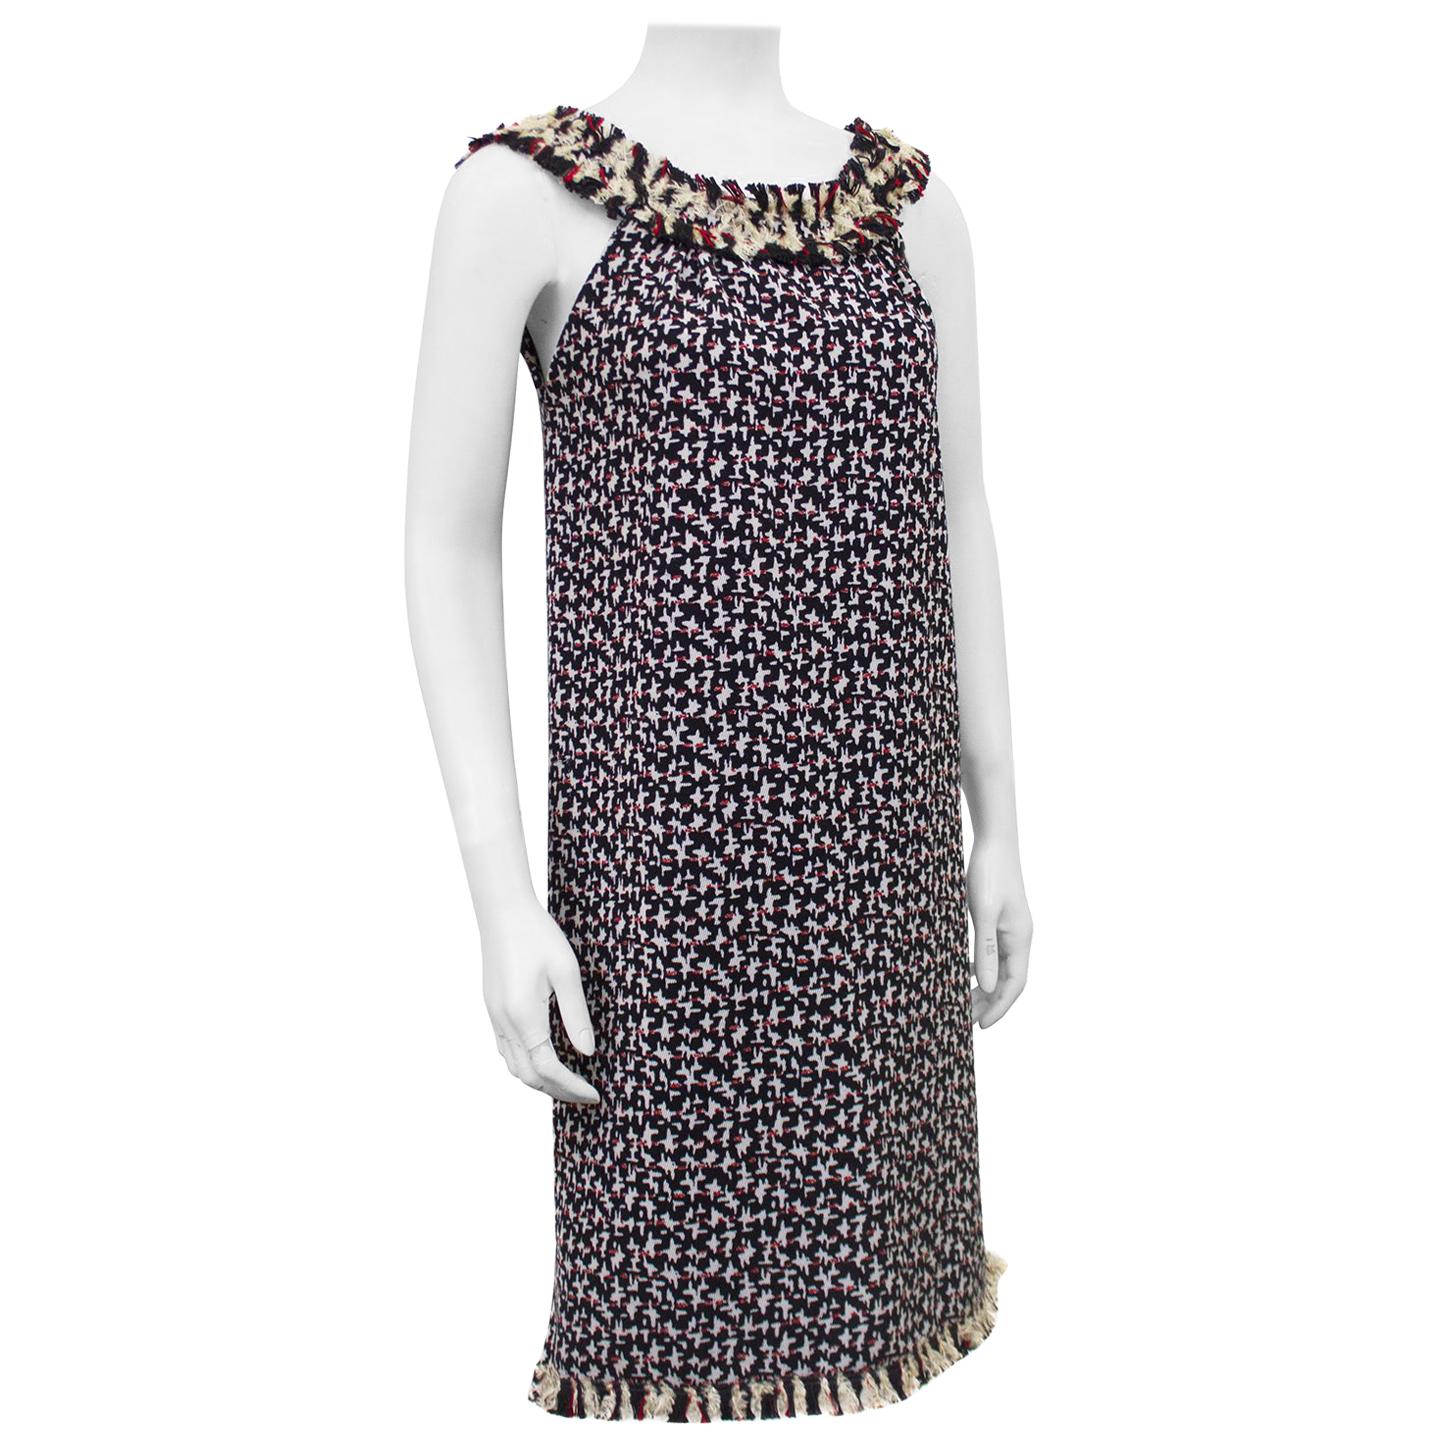 Mid 2000s Oscar de la Renta Navy and Red Abstract Houndstooth Dress Ensemble